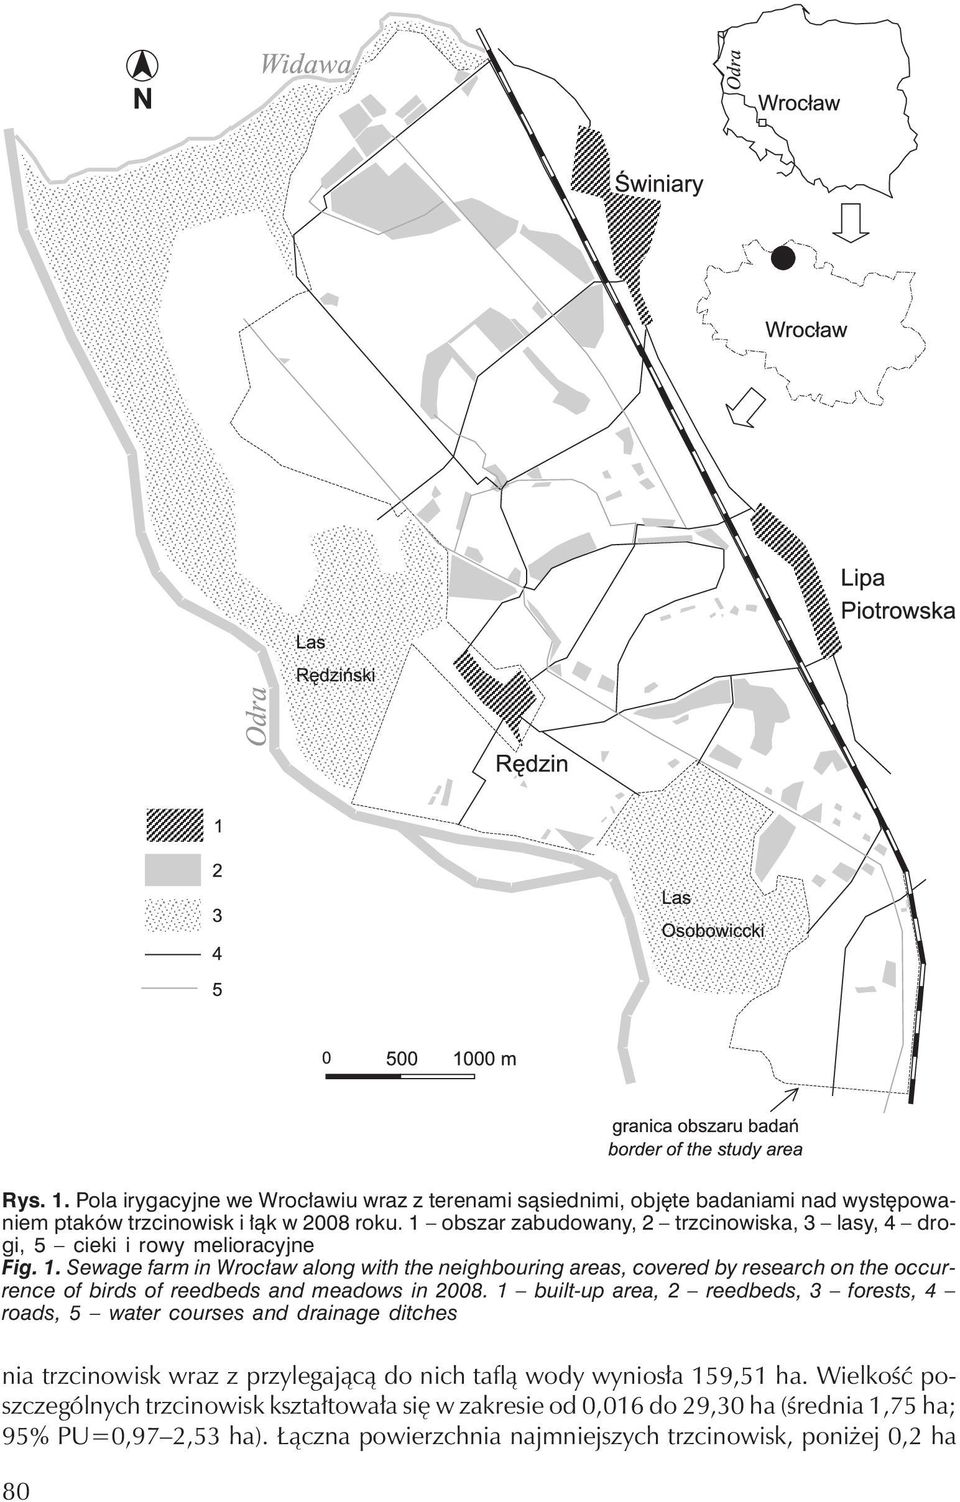 Sewage farm in Wrocław along with the neighbouring areas, covered by research on the occurrence of birds of reedbeds and meadows in 2008.